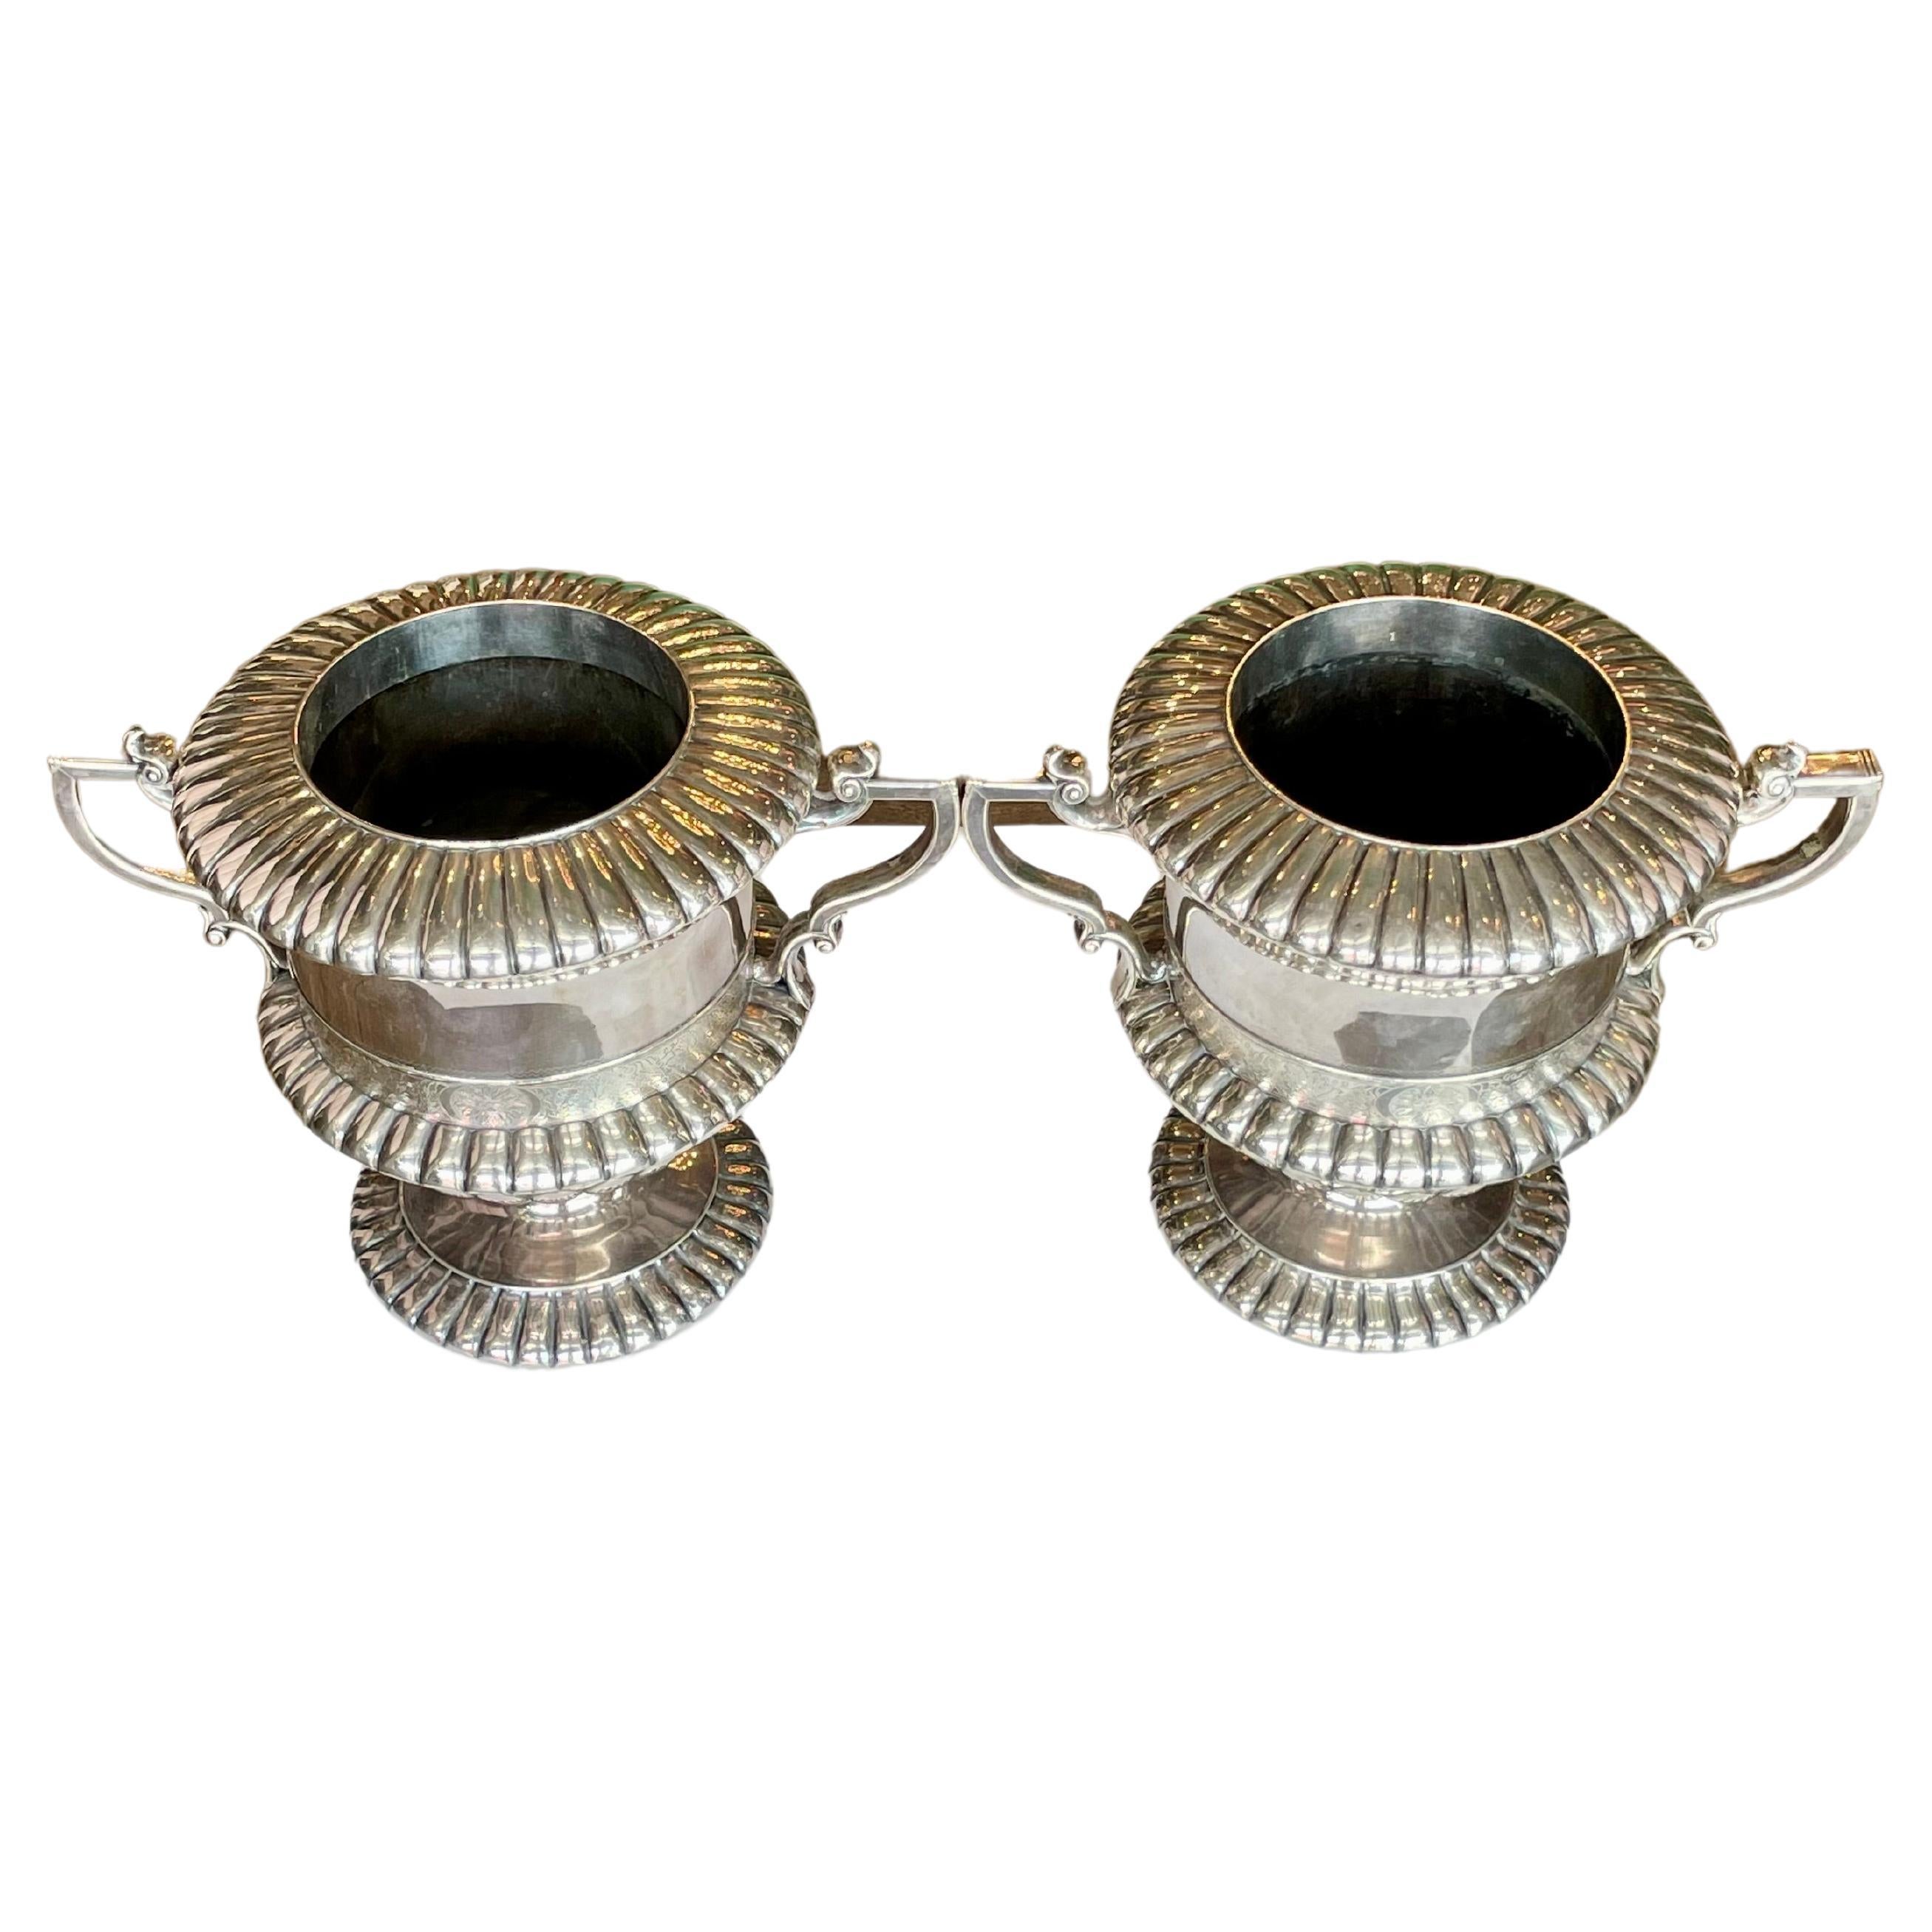 Victorian 19th Century Sheffield Silver-Plated Wine Coolers For Sale